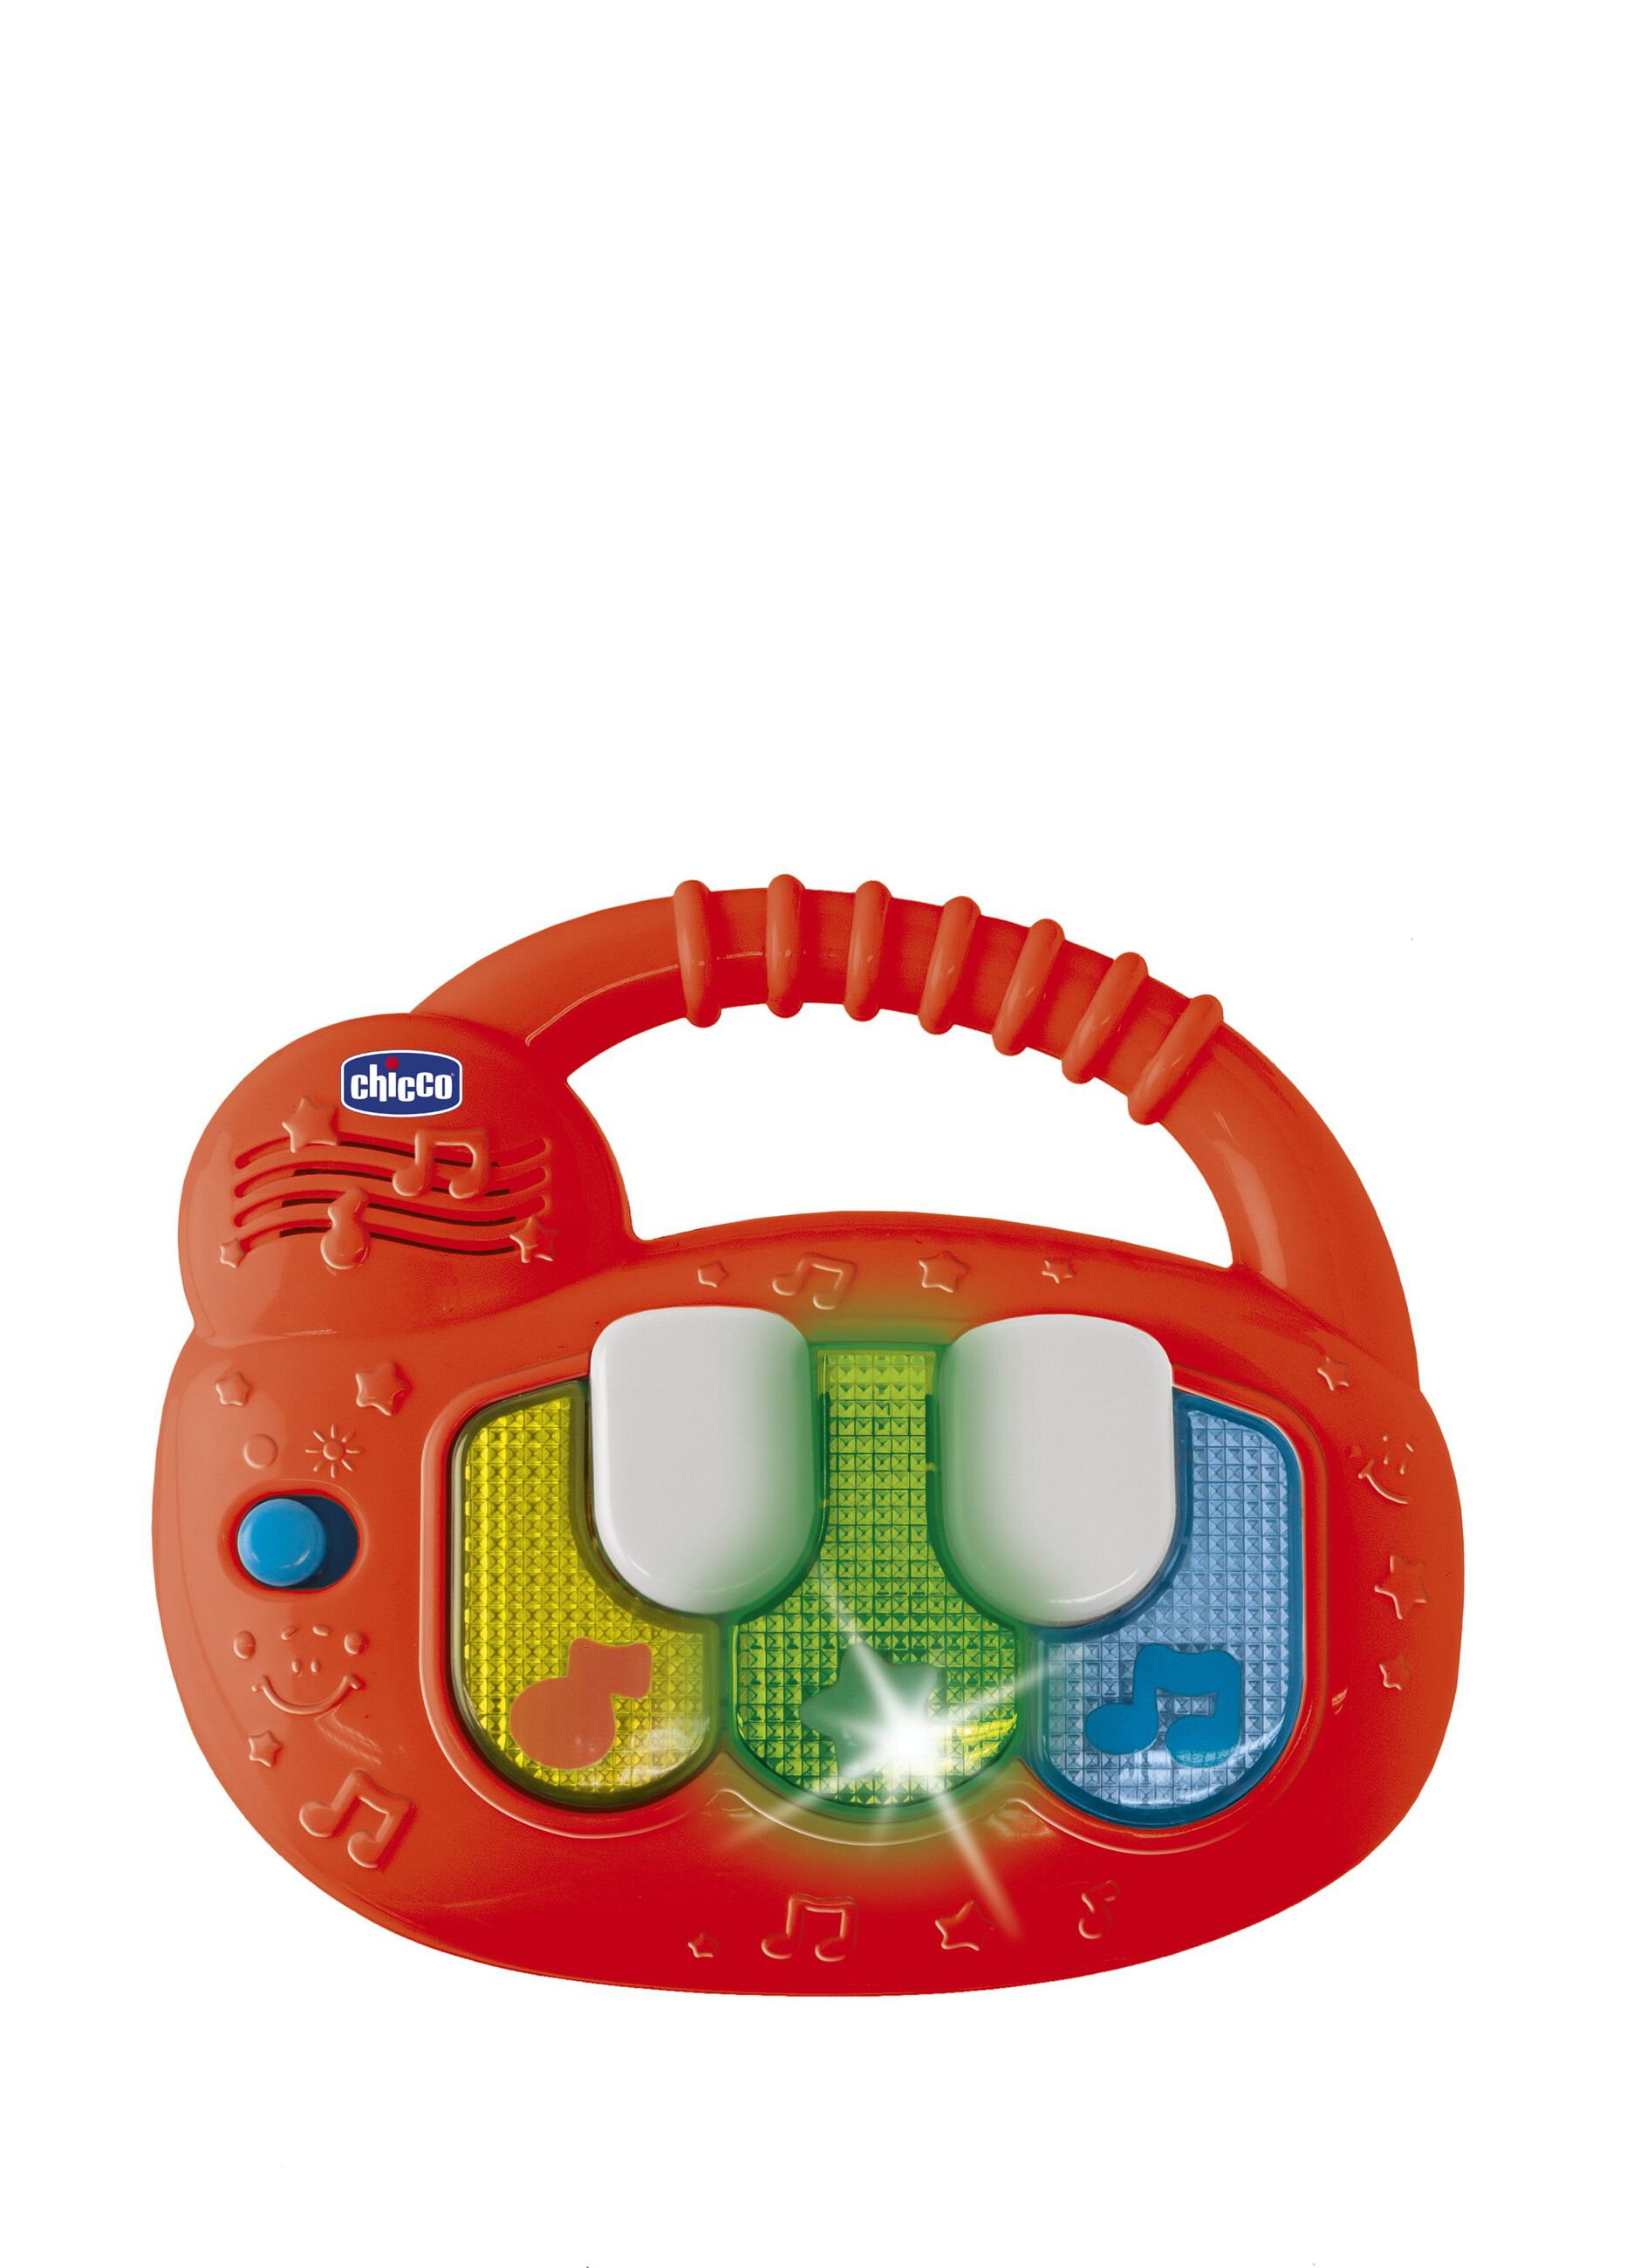 Baby Piano musical Chicco